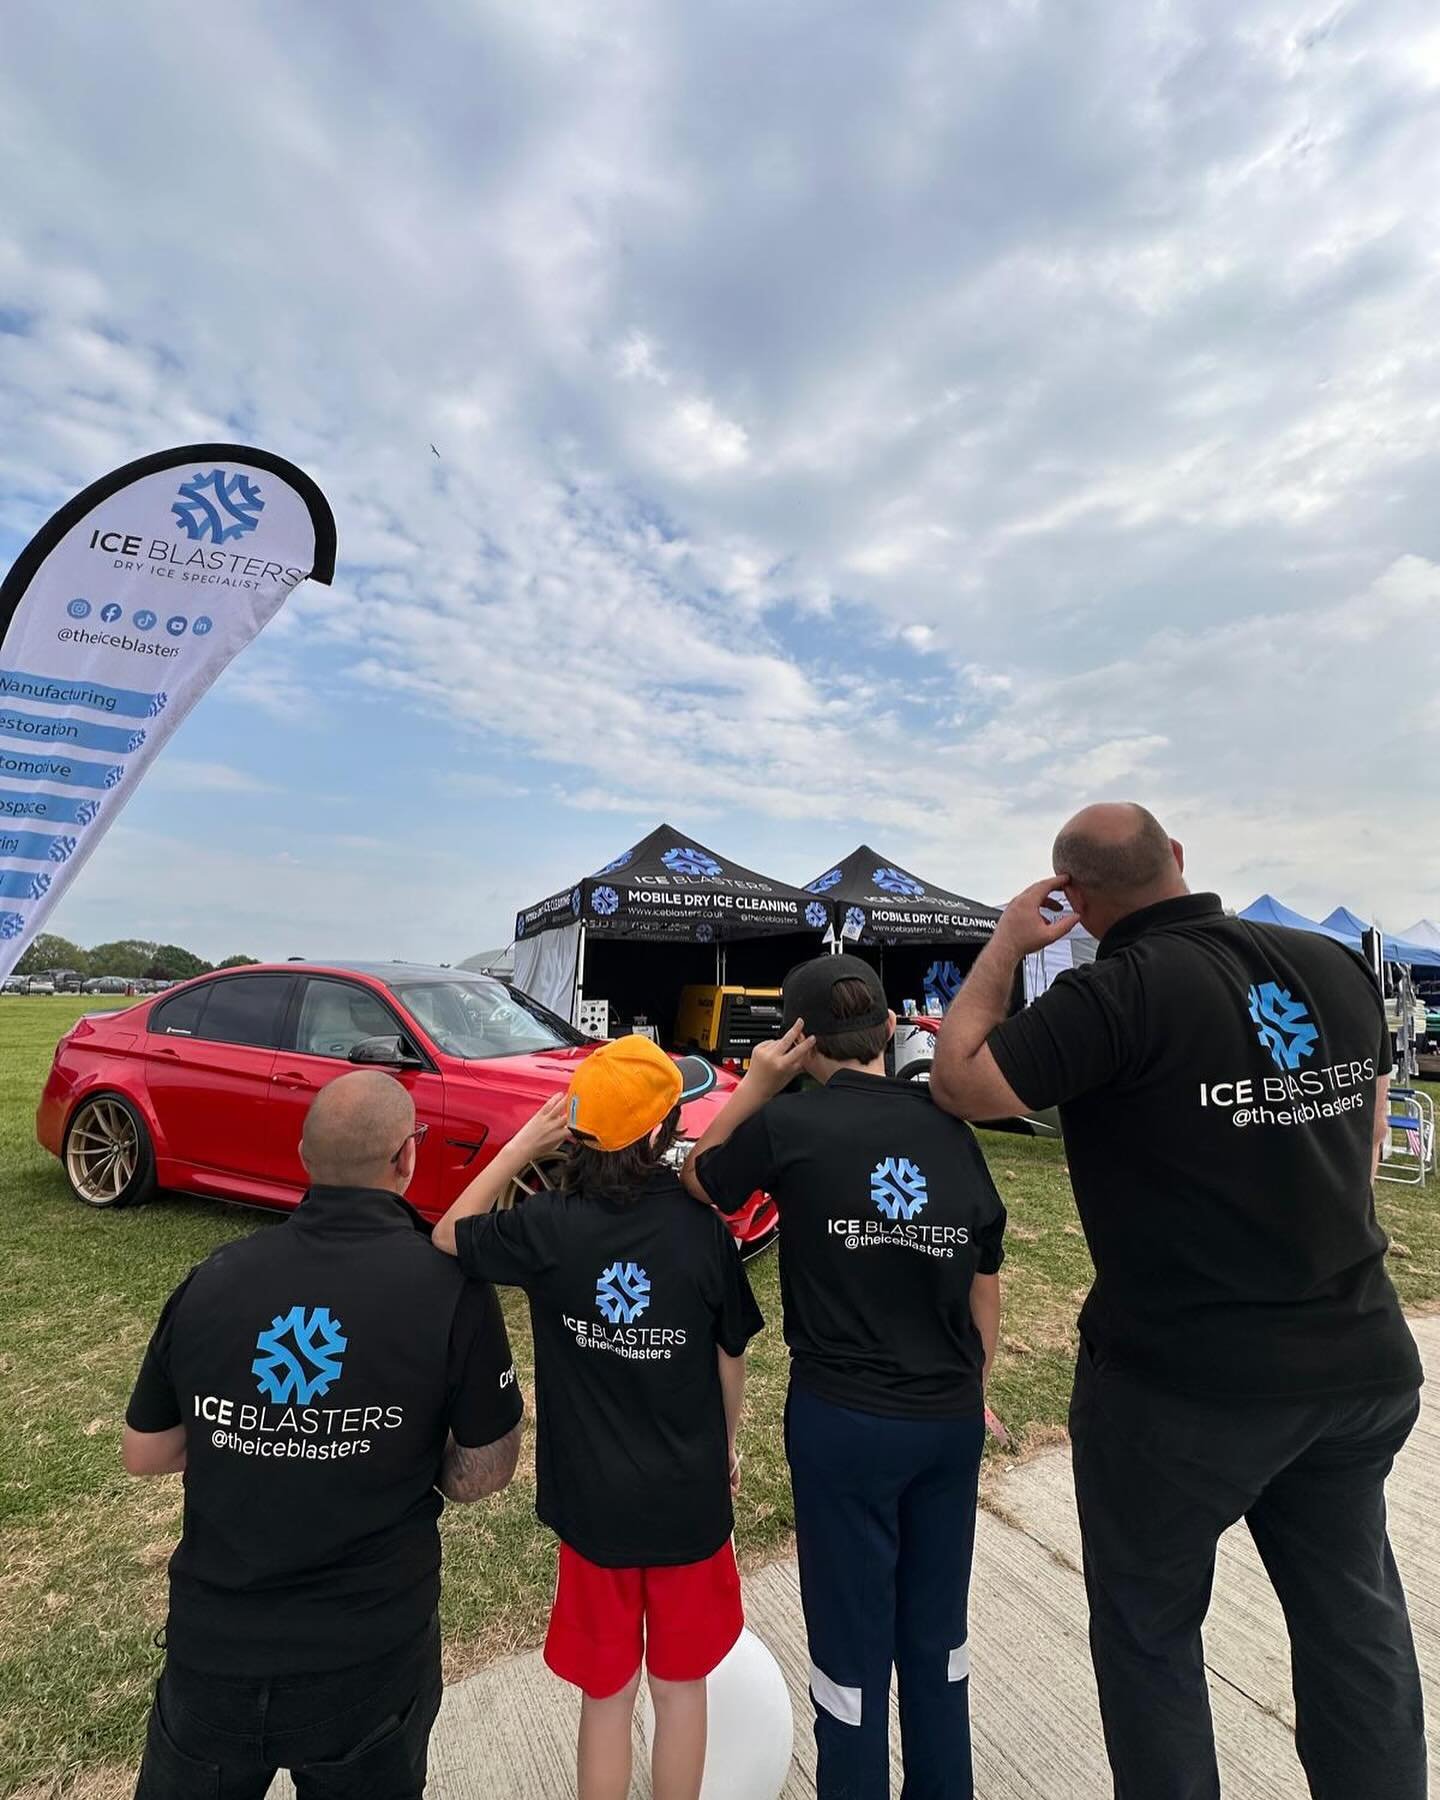 Day 1 complete @supercarfest 💨

Amazing day, bring on Day 2. Sunshine is on the way.😎

✉️ hello@iceblasters.co.uk 
📞 01604 266256
🚨 Nationwide coverage 
🌎 www.iceblasters.co.uk

#dryice #dryiceblasting #mobile #dryicecleaning #nationwide #servic